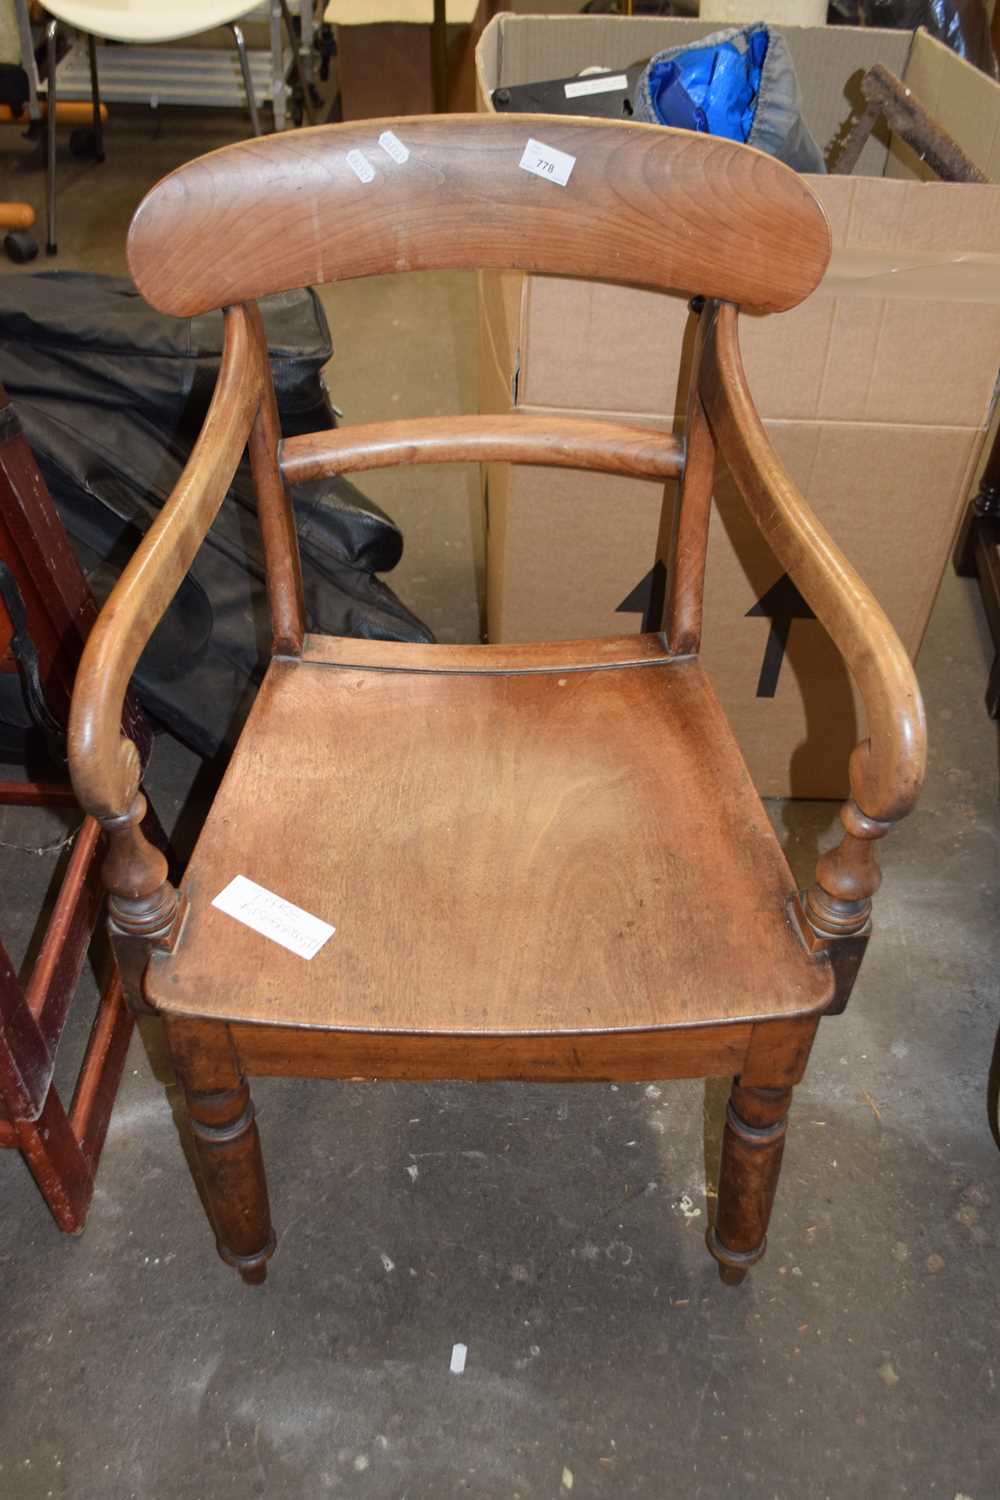 Mahogany elbow chair with wooden seat and turned legs